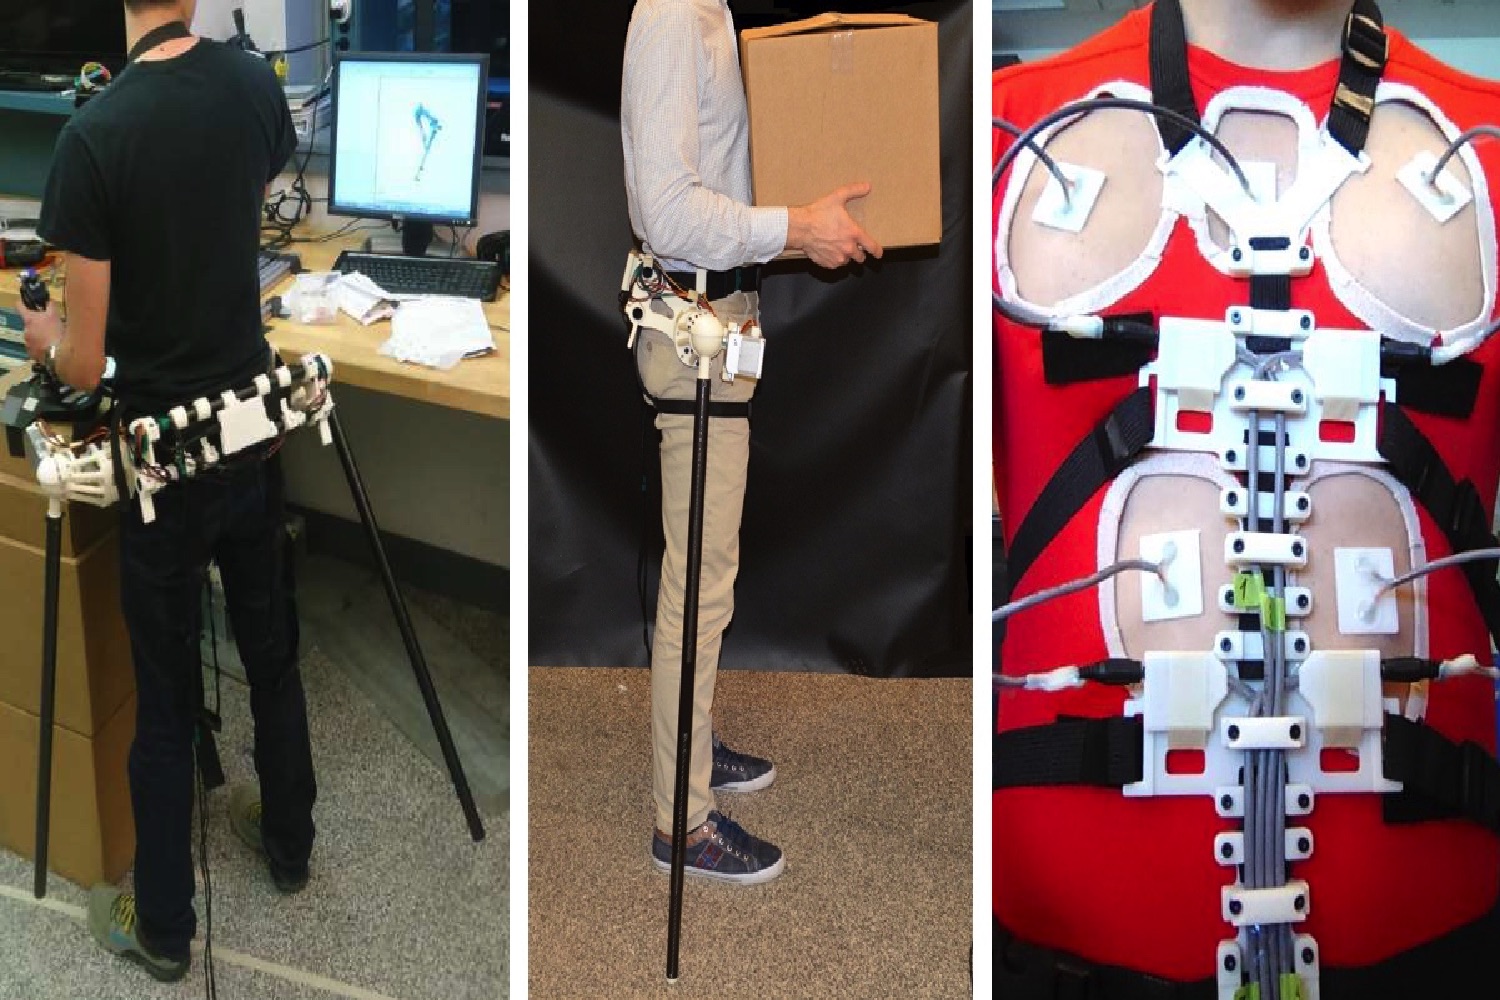 mit supernumerary robotic limbs project mjkyode0oa